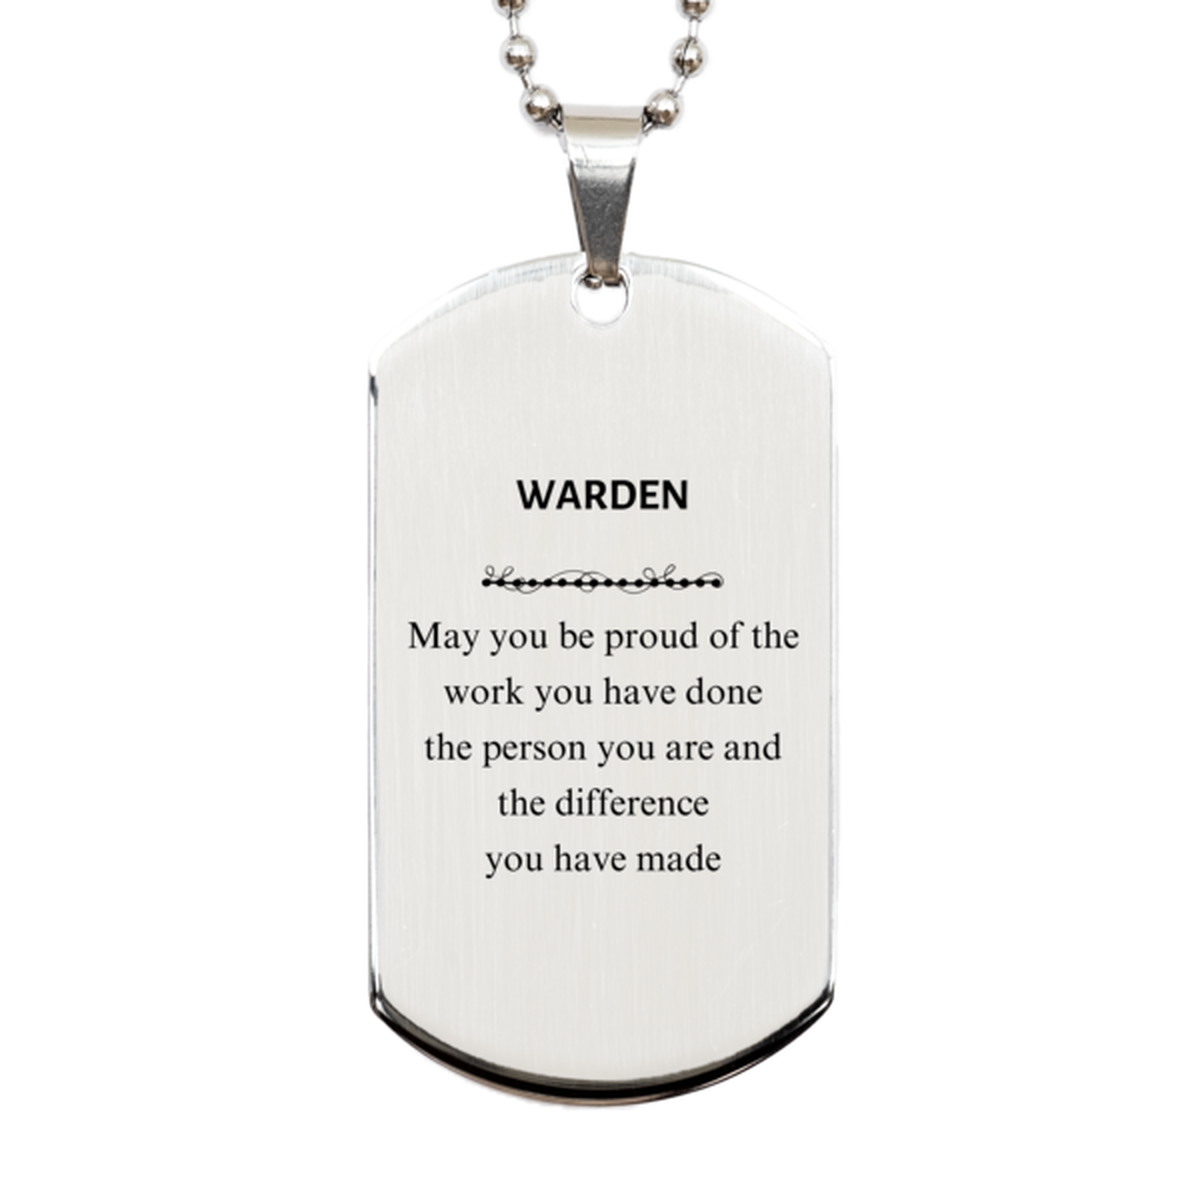 Warden May you be proud of the work you have done, Retirement Warden Silver Dog Tag for Colleague Appreciation Gifts Amazing for Warden